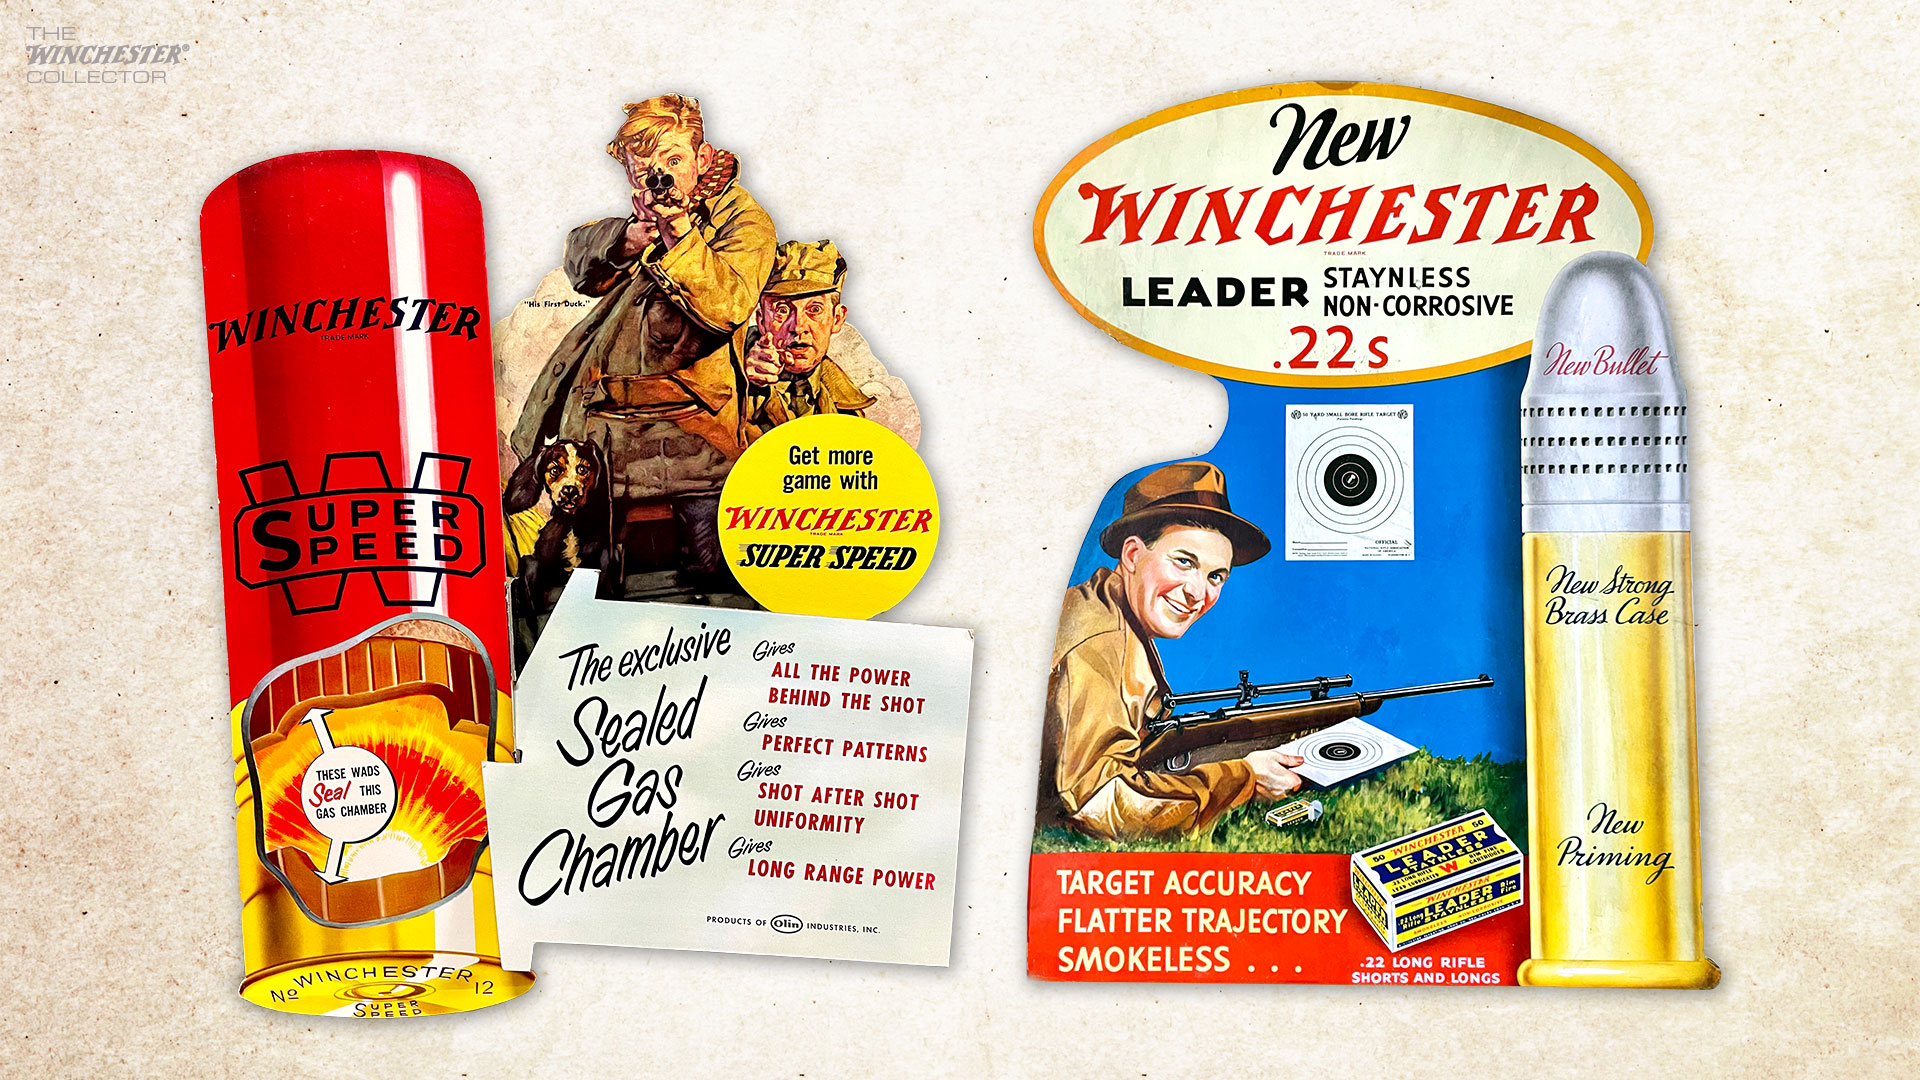 Example of vintage Winchester point-of-purchase advertising (courtesy Jennifer and Gary Gole via Winchester Arms Collectors Association)